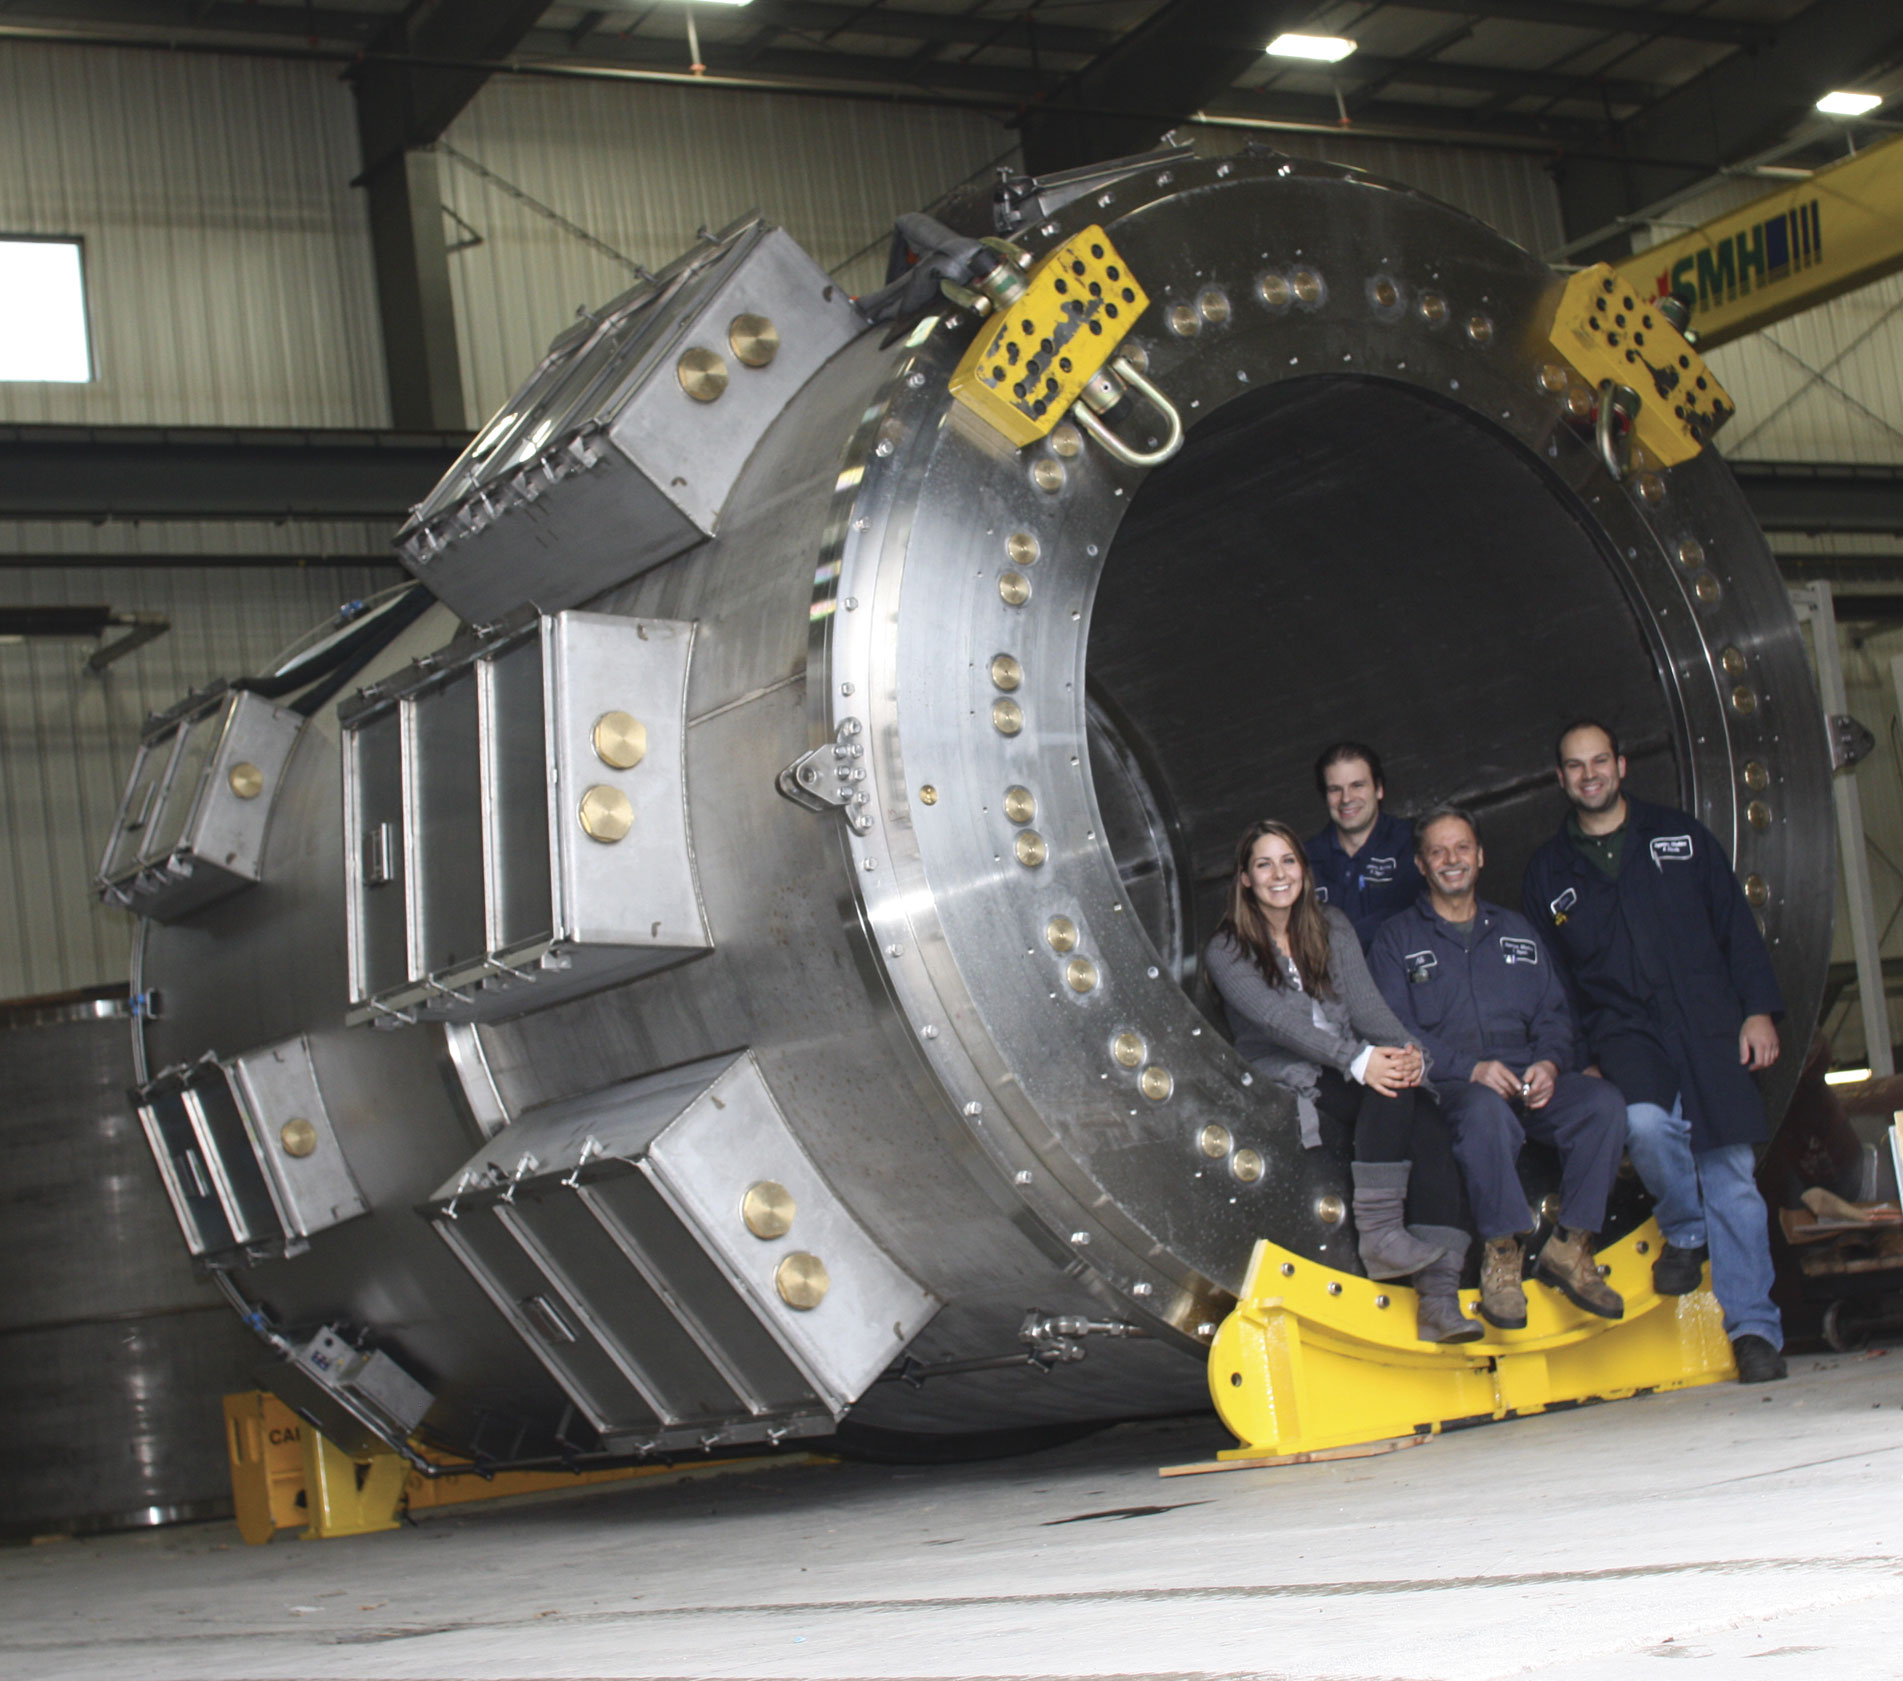 This 31,751 kg (70,000 lb) high voltage slip ring for a floating production, storage and offloading vessel was shipped to Brazil. The part is made mostly of stainless steel, copper and composite materials. Inside the part from left: Monica Boaretto, treasurer; Dan Boaretto, president; Ali Solhdoust, plant manager; and Peter Boaretto, vice president.